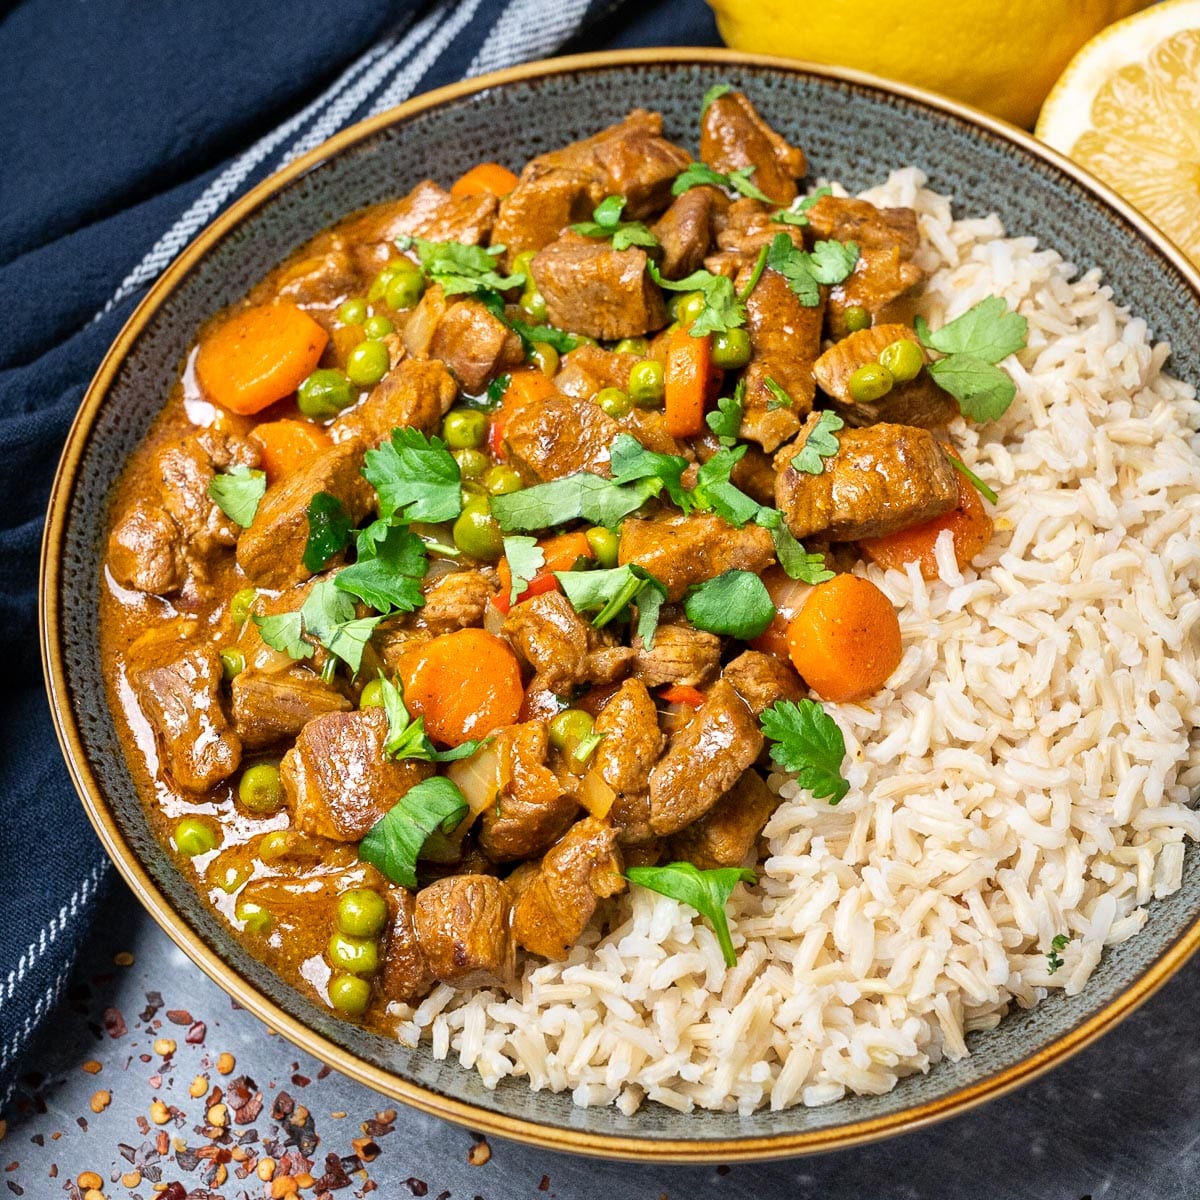 A bowl of curry with rice on the side